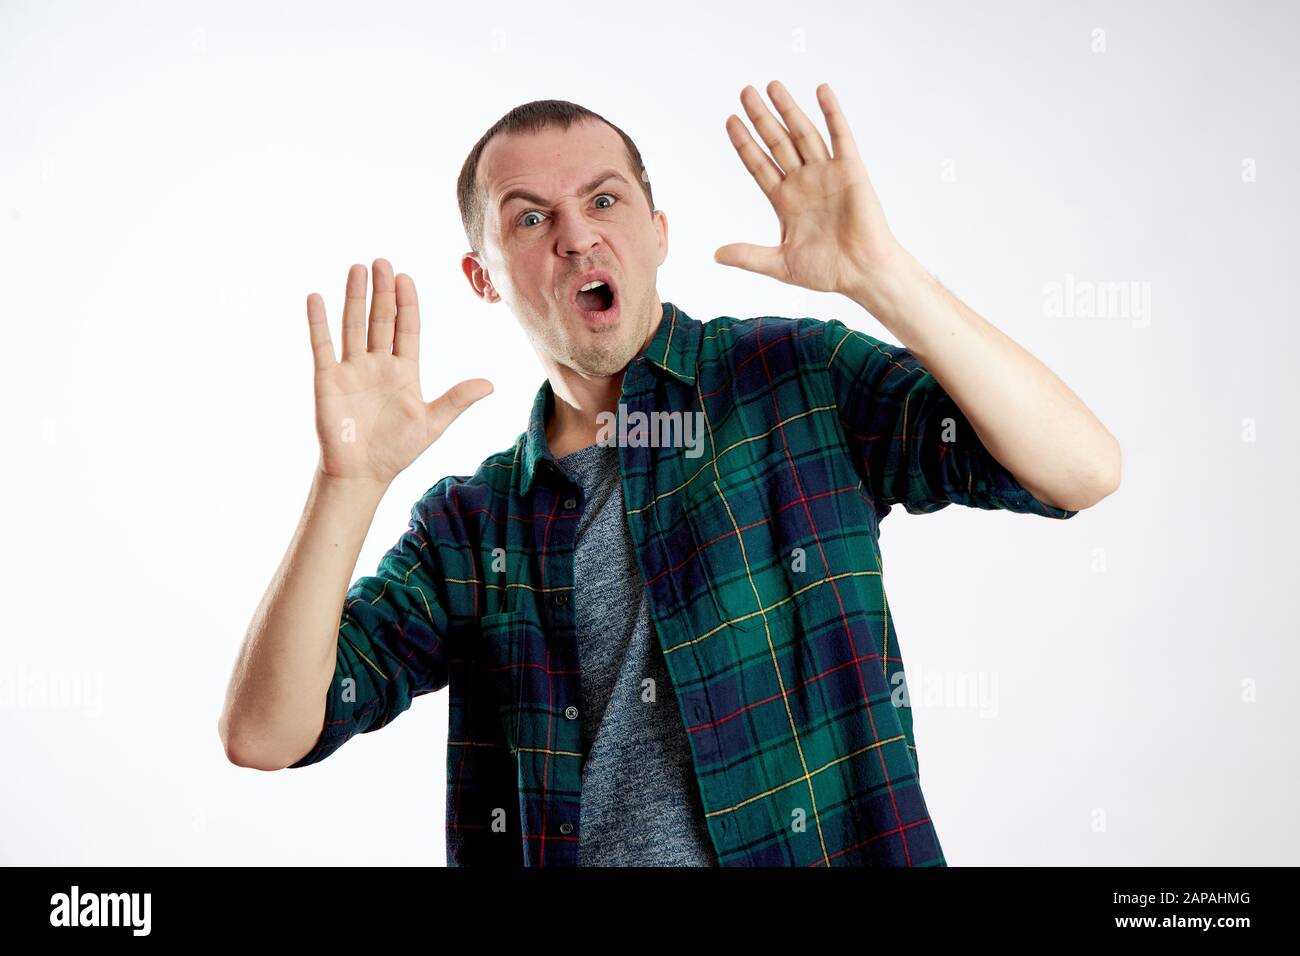 Fear And Fright Of A Man Guy Is Afraid Scared Face Stock Photo Alamy